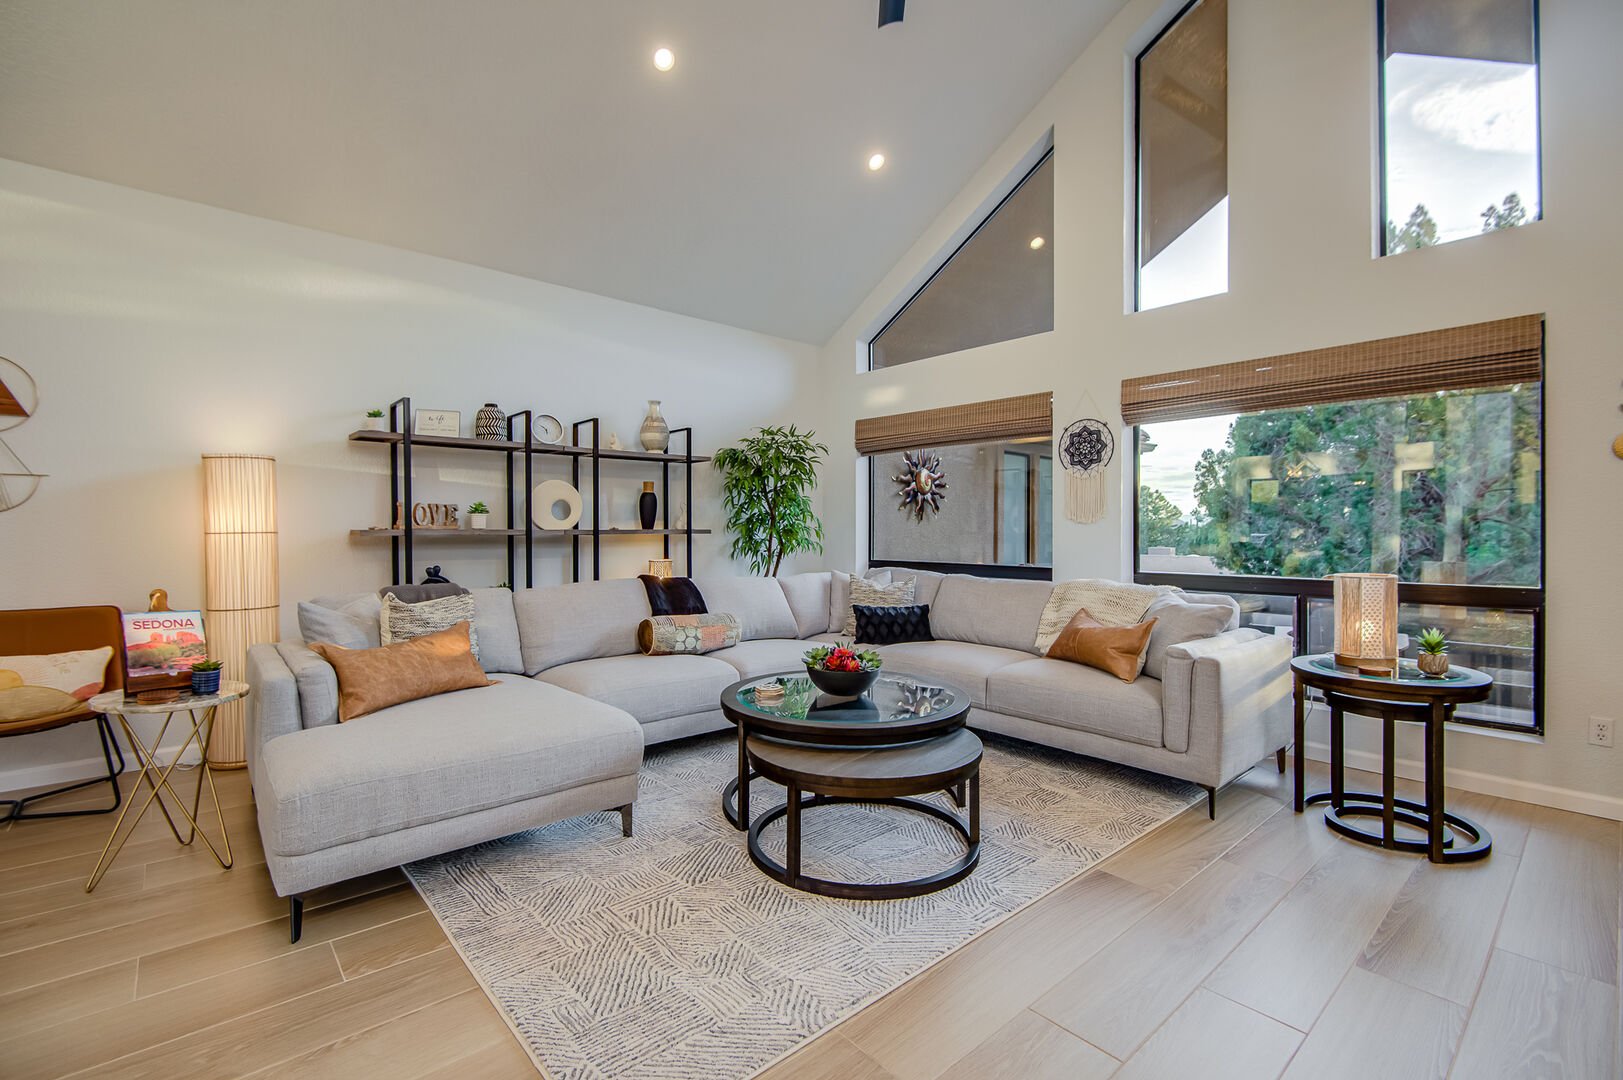 Living Room with High Ceilings and Large Windows and Offers a Cozy Sectional Sofa